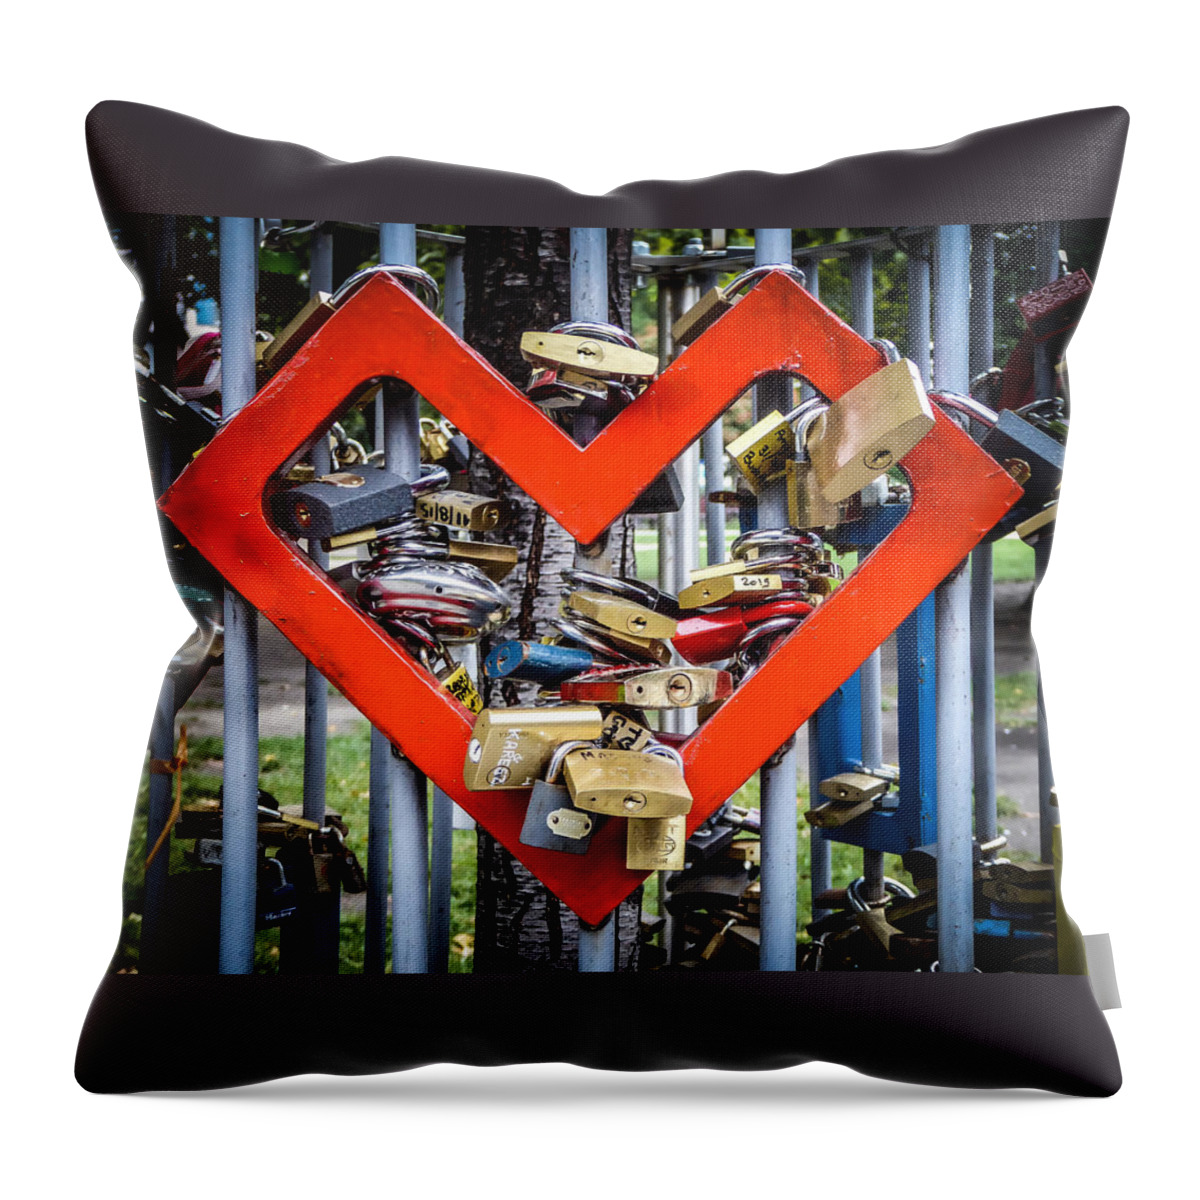 Budapest Throw Pillow featuring the photograph Lovers Tree - Budapest by Pamela Newcomb